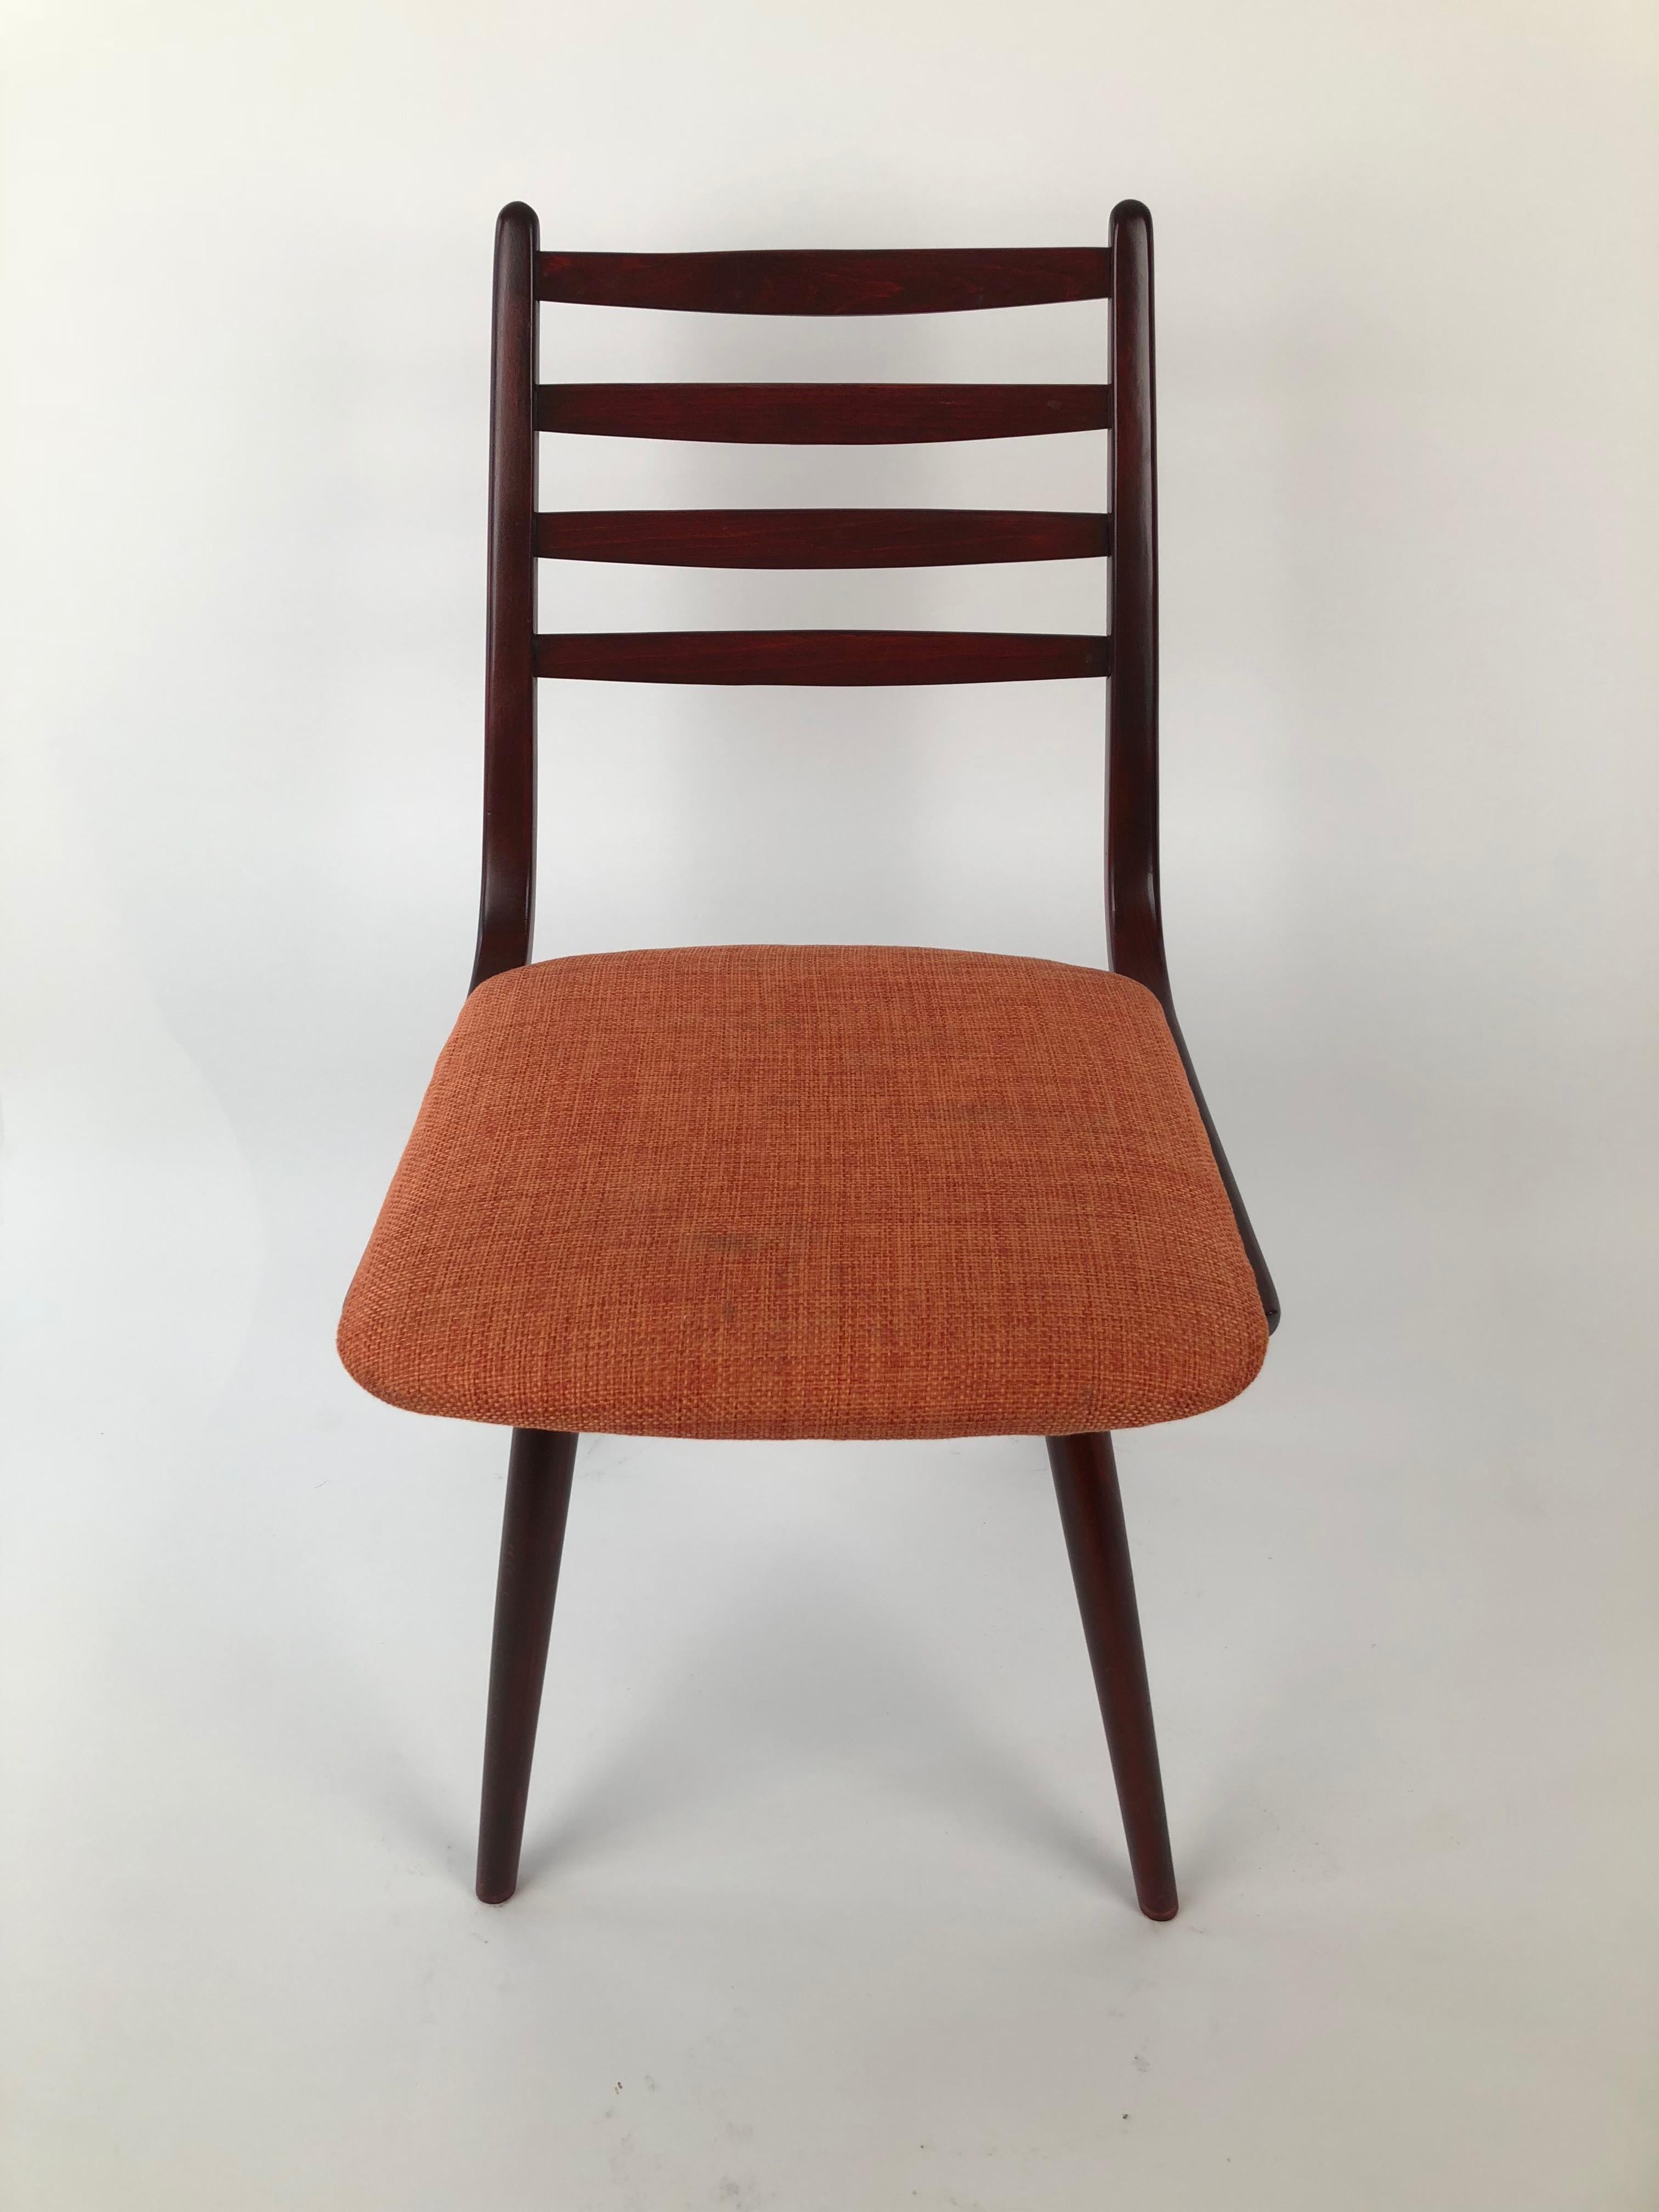 Set of 4 Dinning Chairs, 1970's, Thonet Factory In Good Condition For Sale In Vienna, Austria